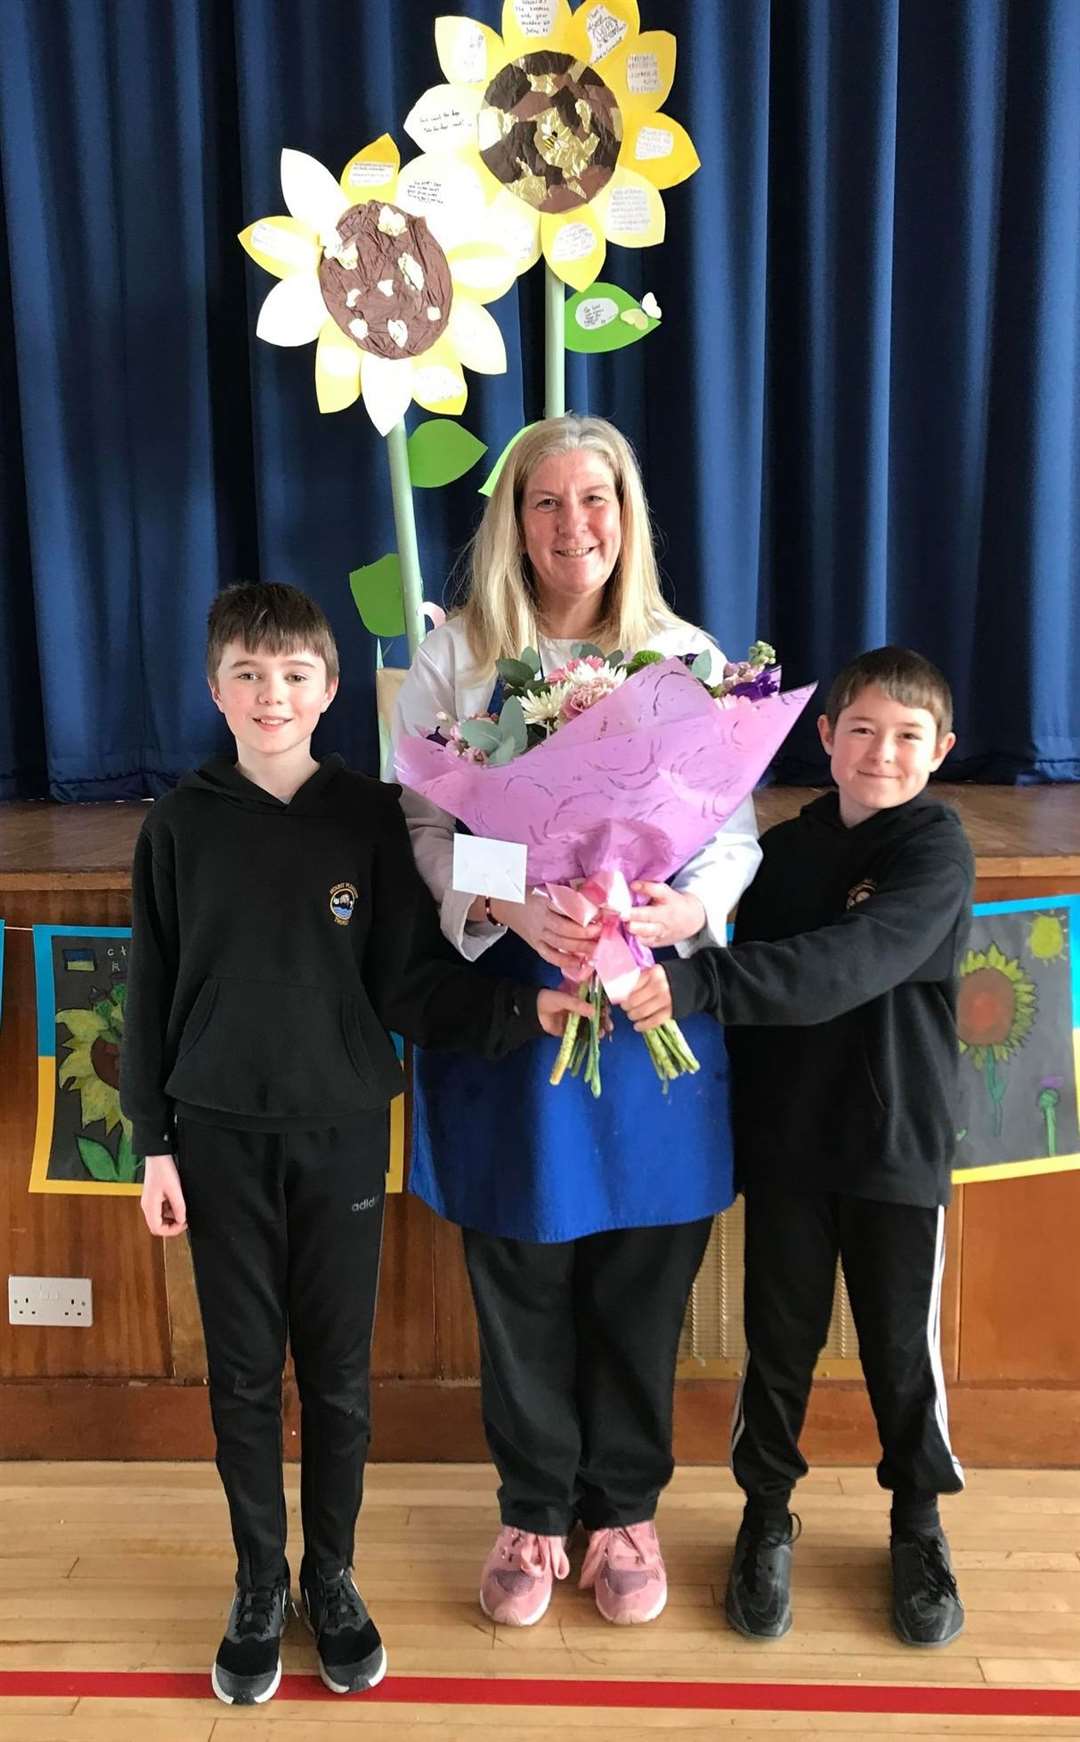 Catriona Manson, along with Liam Macgruer and Kody Munro from P7, who presented her with flowers on her last day of work after 15 years of cooking lunches at Mount Pleasant.